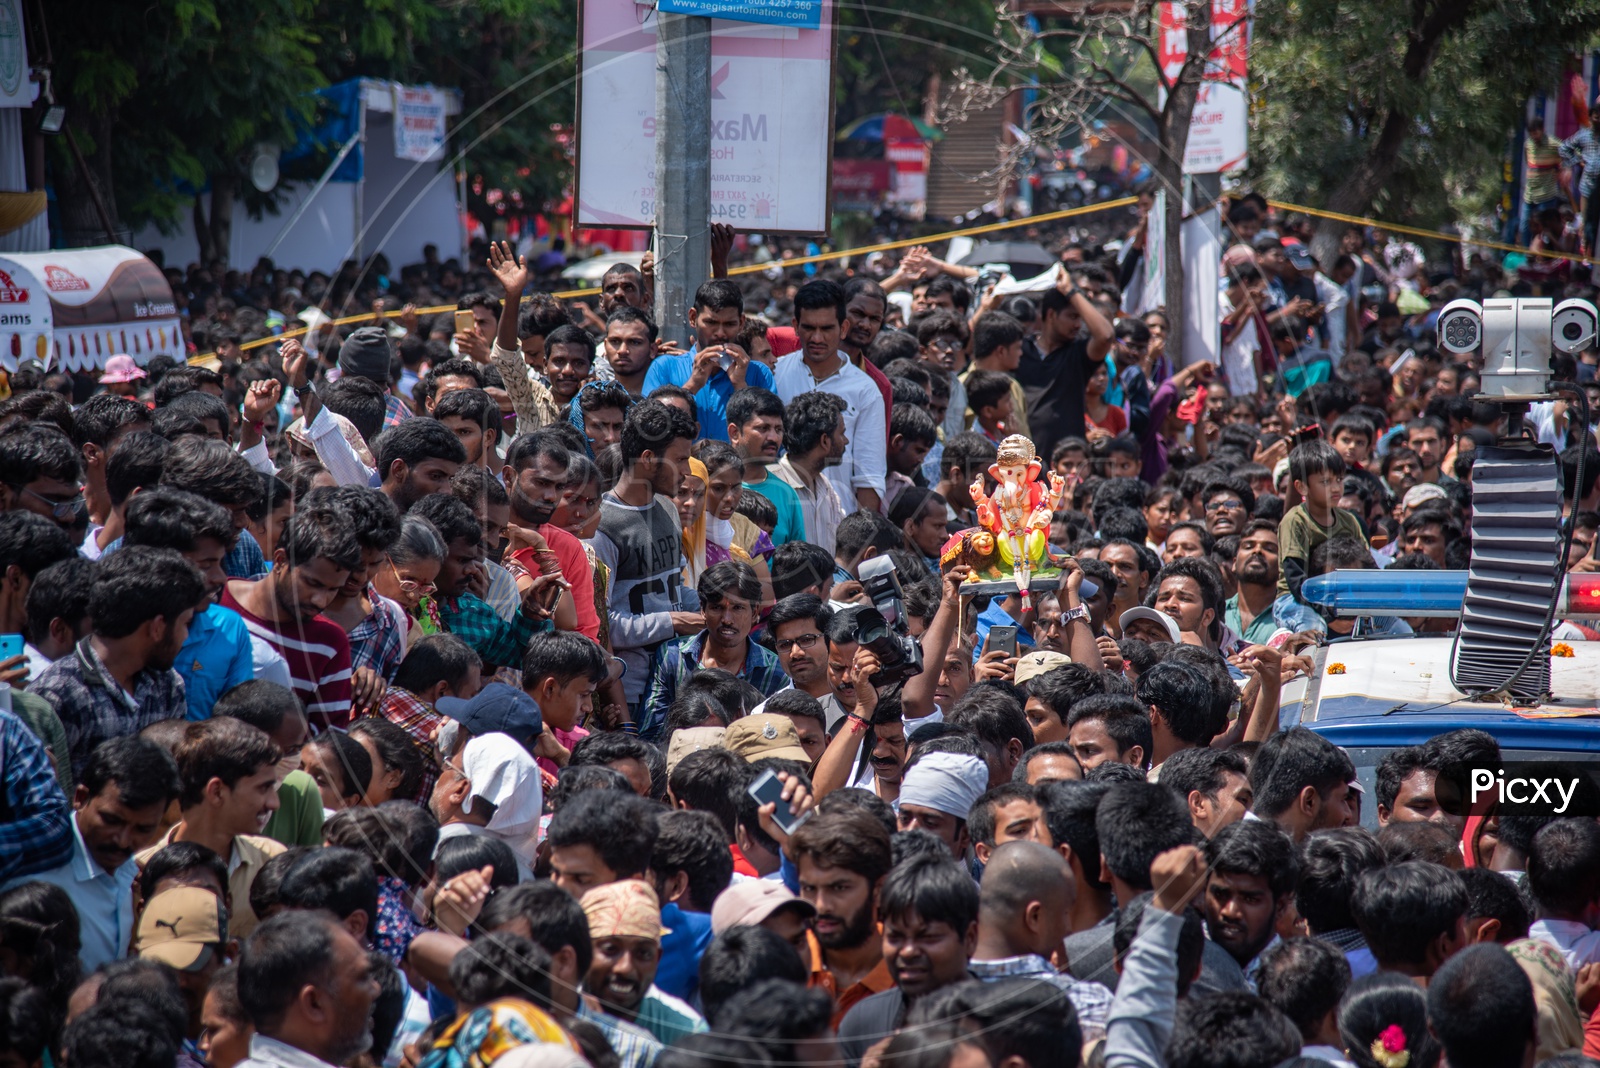 A small ganesh idol being carried by a devotee among humongous crowd